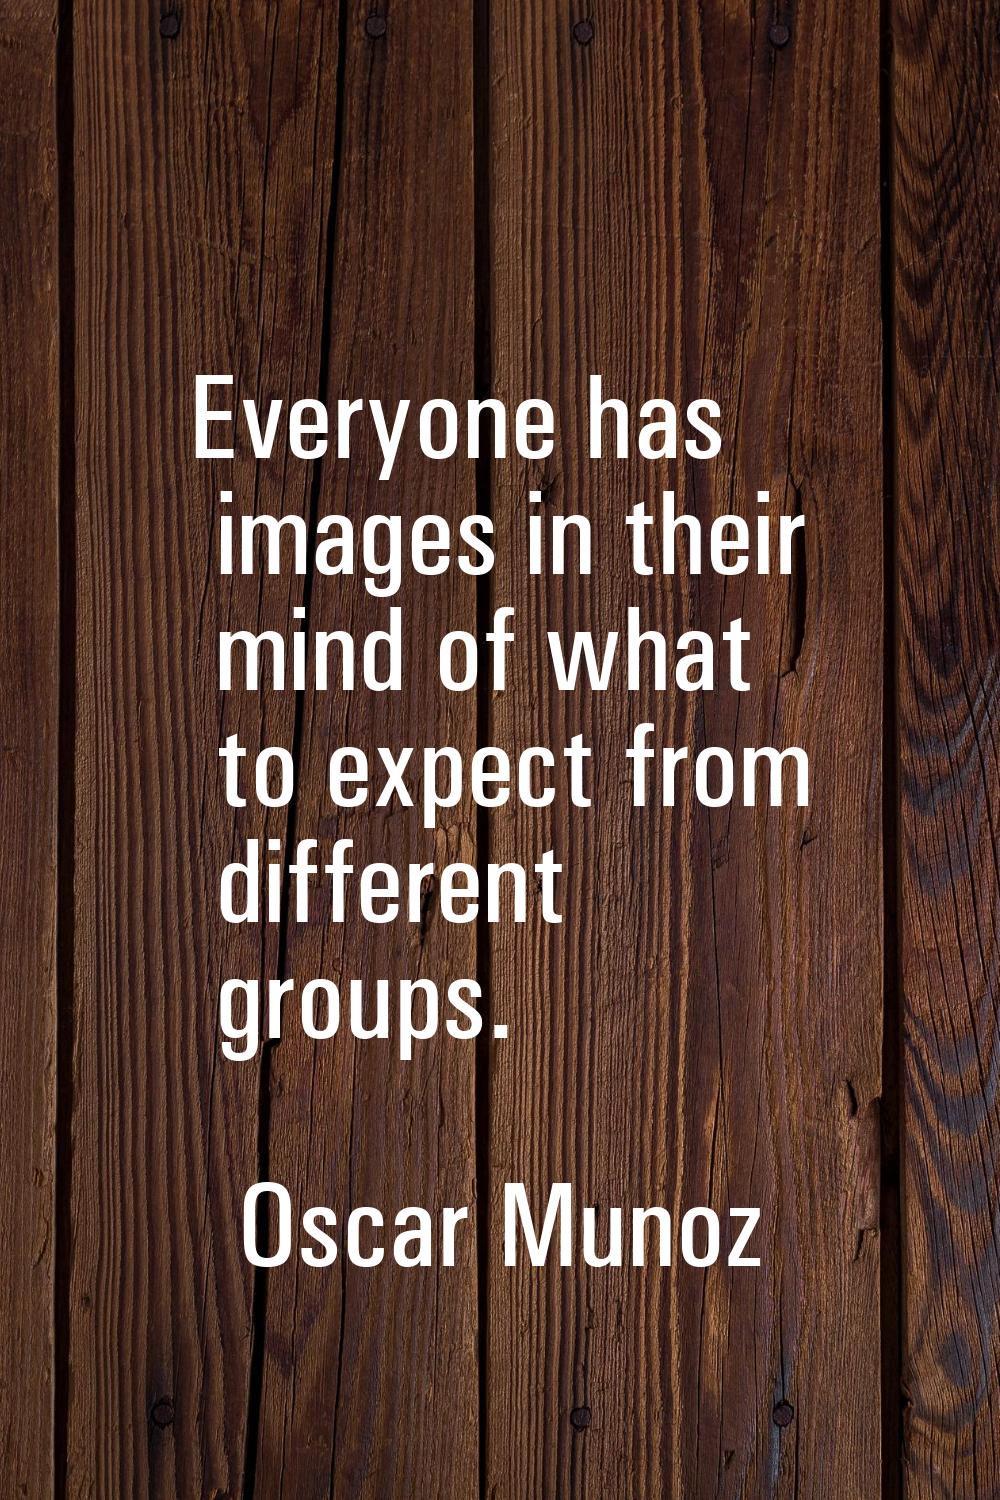 Everyone has images in their mind of what to expect from different groups.